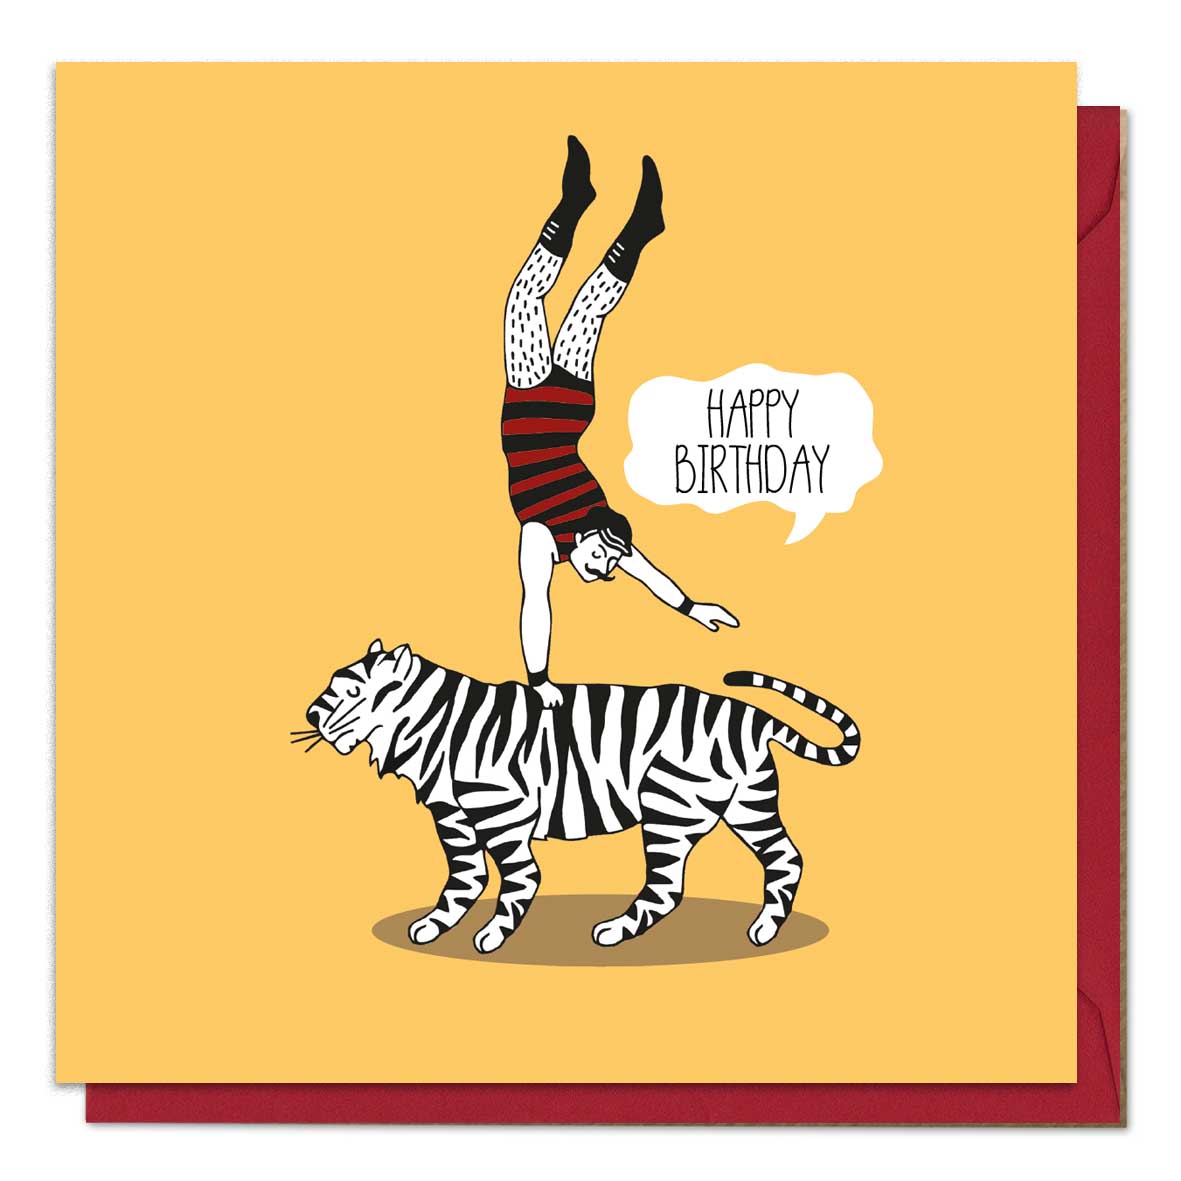 Quirky birthday card featuring an illustration of a man balancing on a tiger